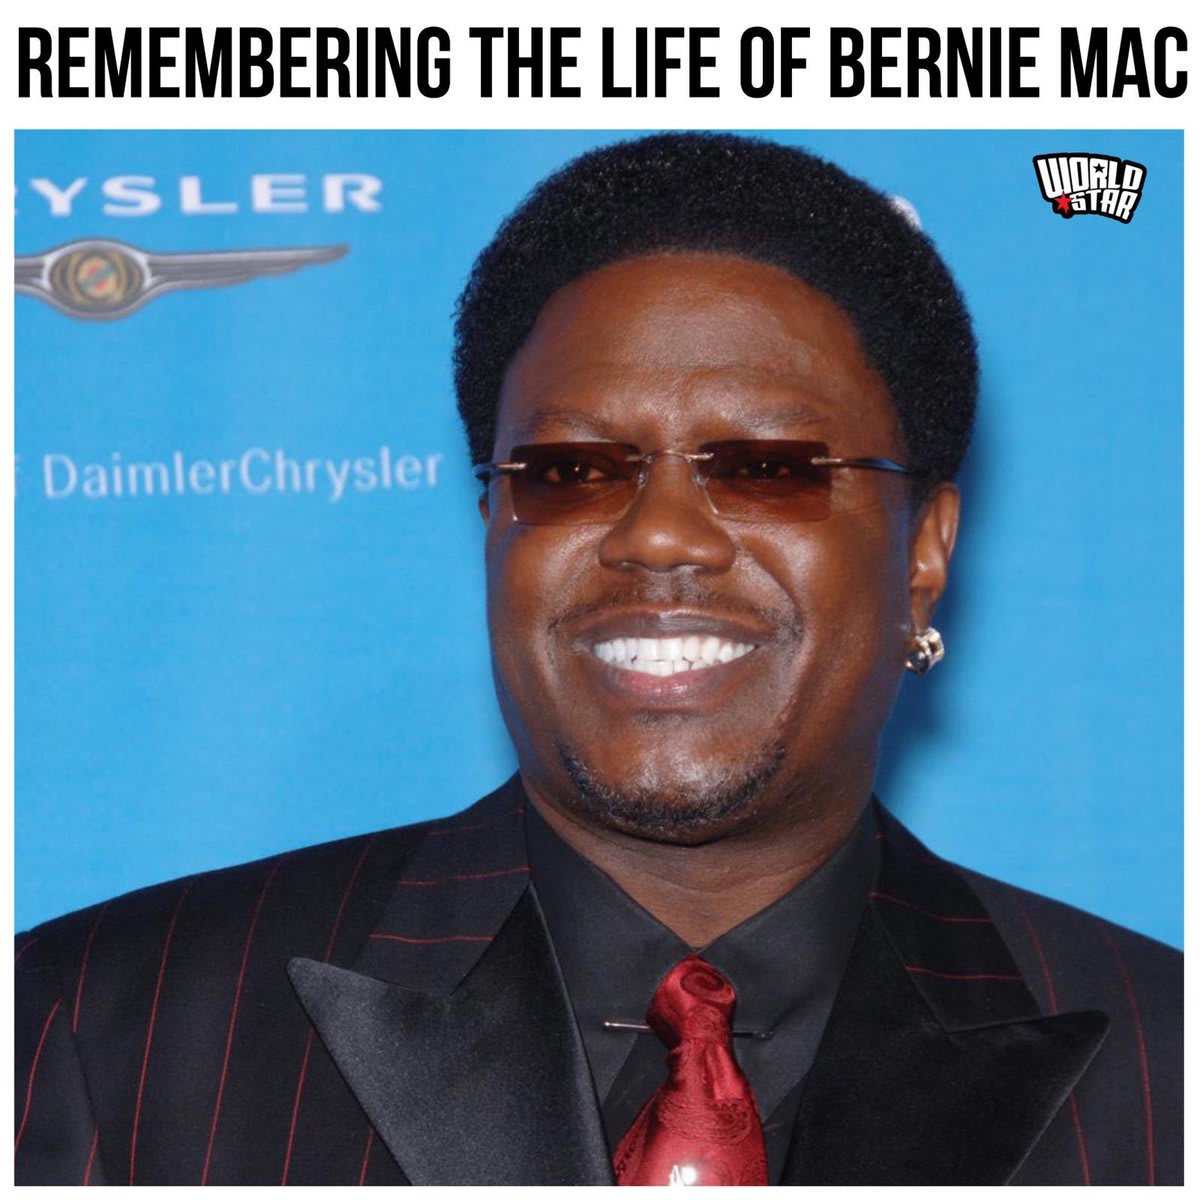 We’d like to take a moment to remember the life of BernieMac who passed away 12 years ago today. Our thoughts and prayers continue to be with his family and friends. Comment your favorite role of his below!